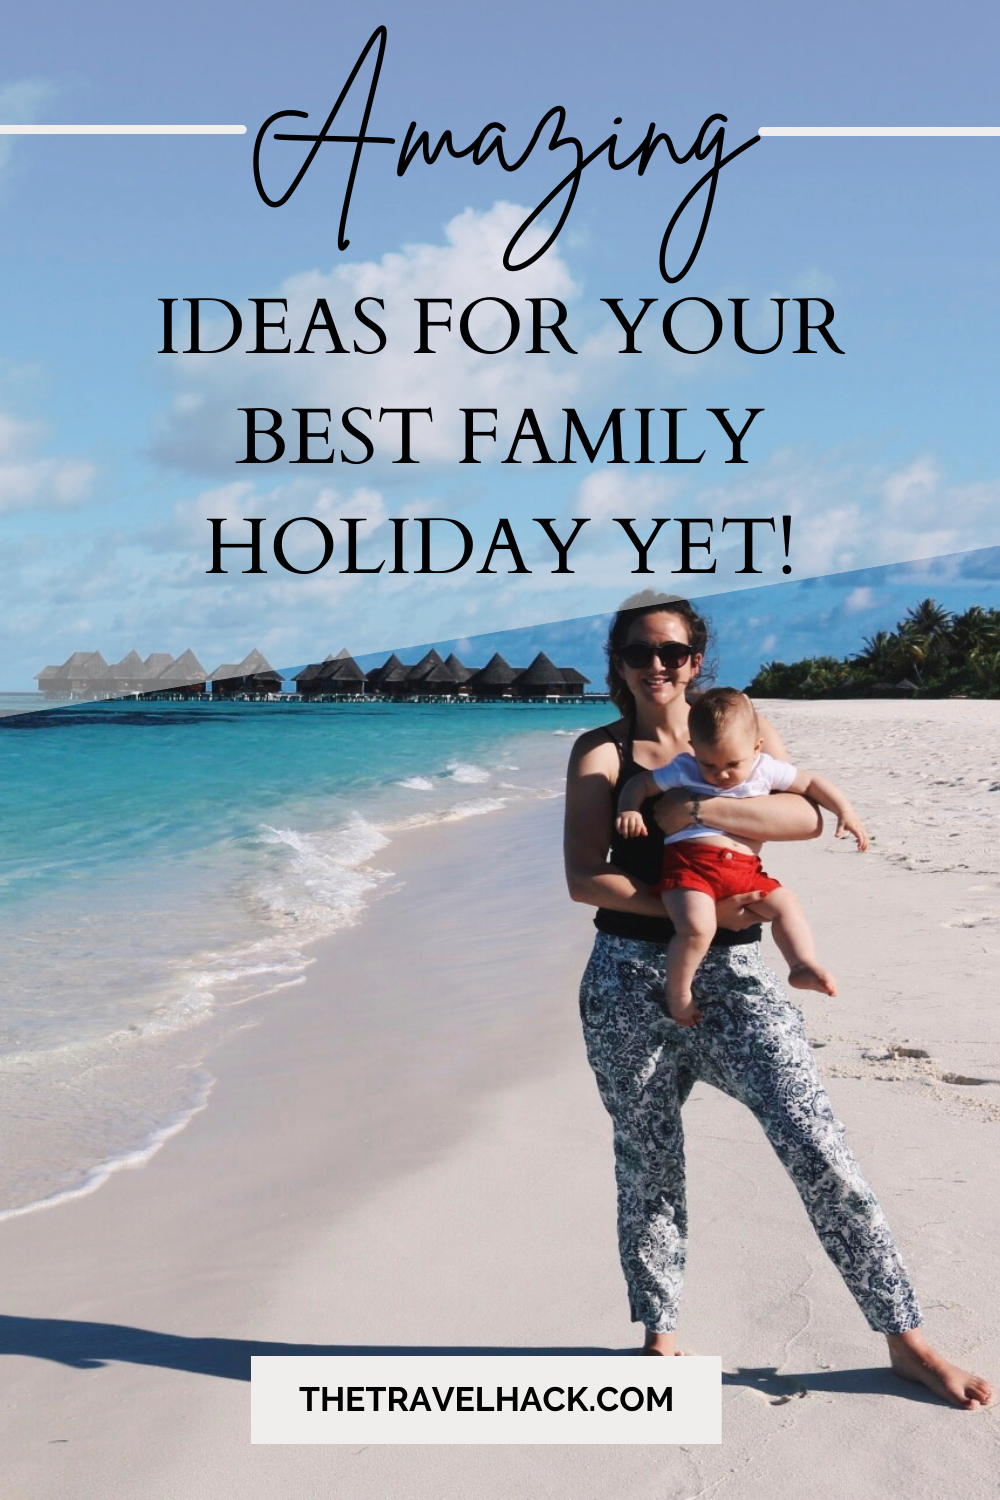 5 ideas for your best family holiday yet